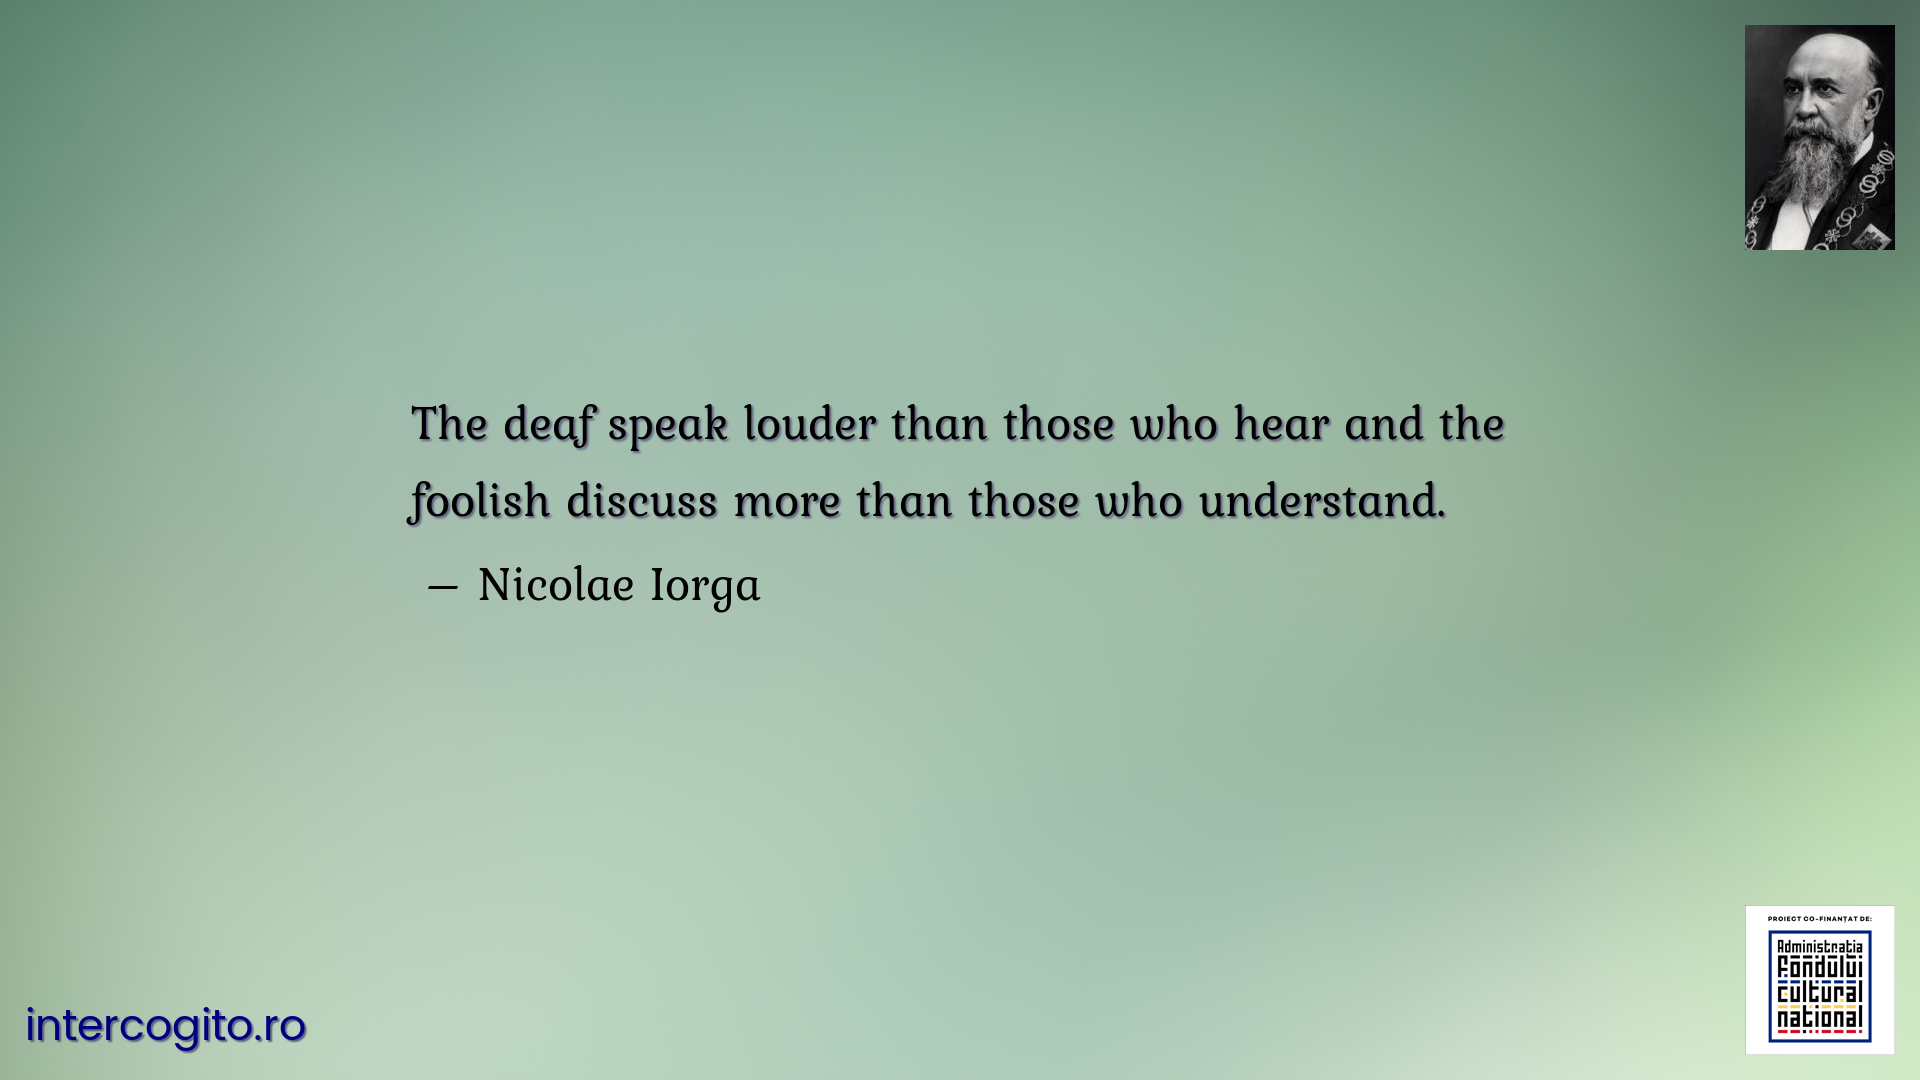 The deaf speak louder than those who hear and the foolish discuss more than those who understand.